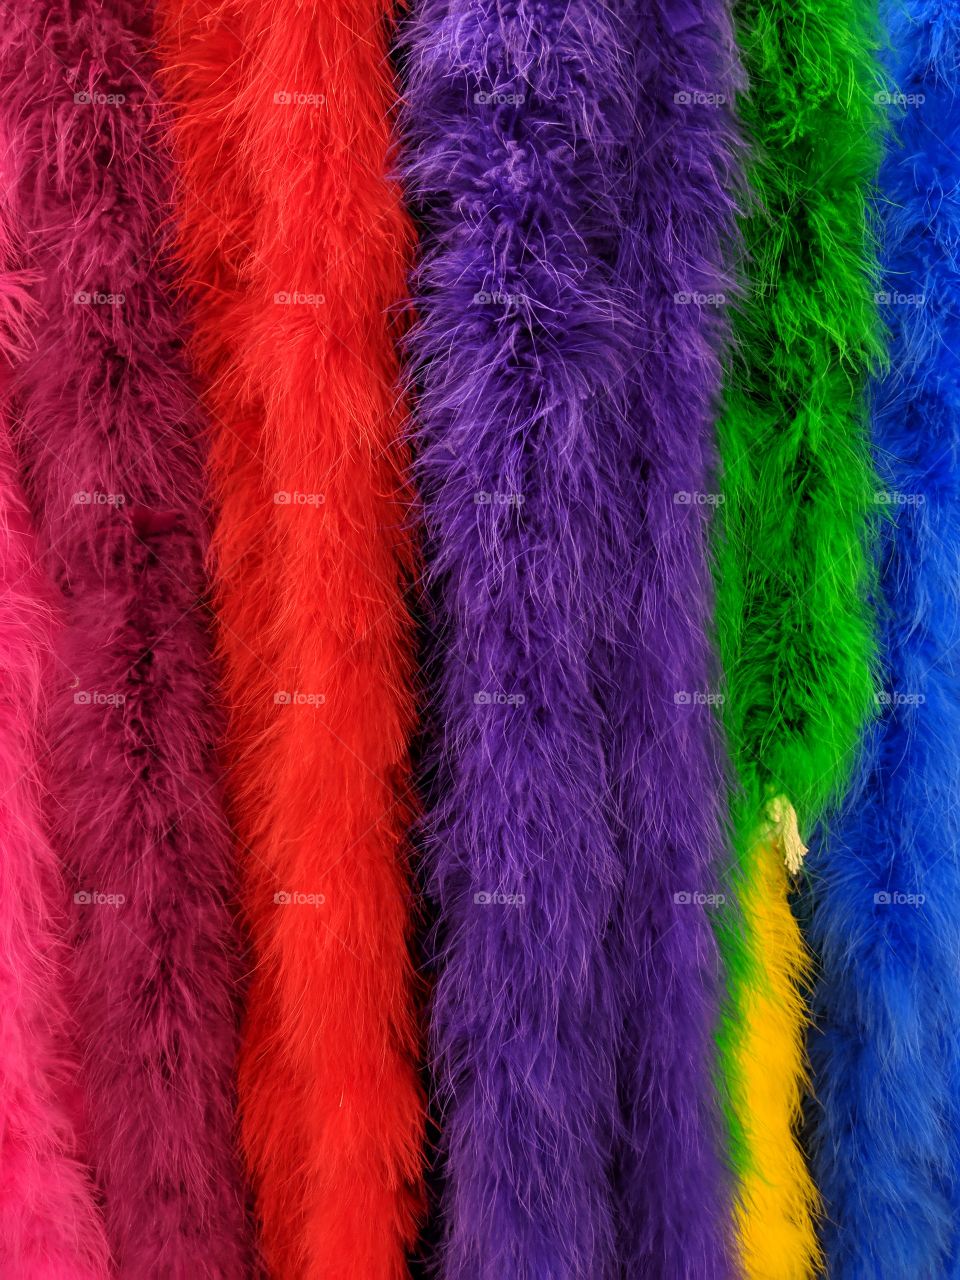 Bright Colors. Feather Boas. Colourful Boas for dress up. Costume supplies. Flamboyant dressup